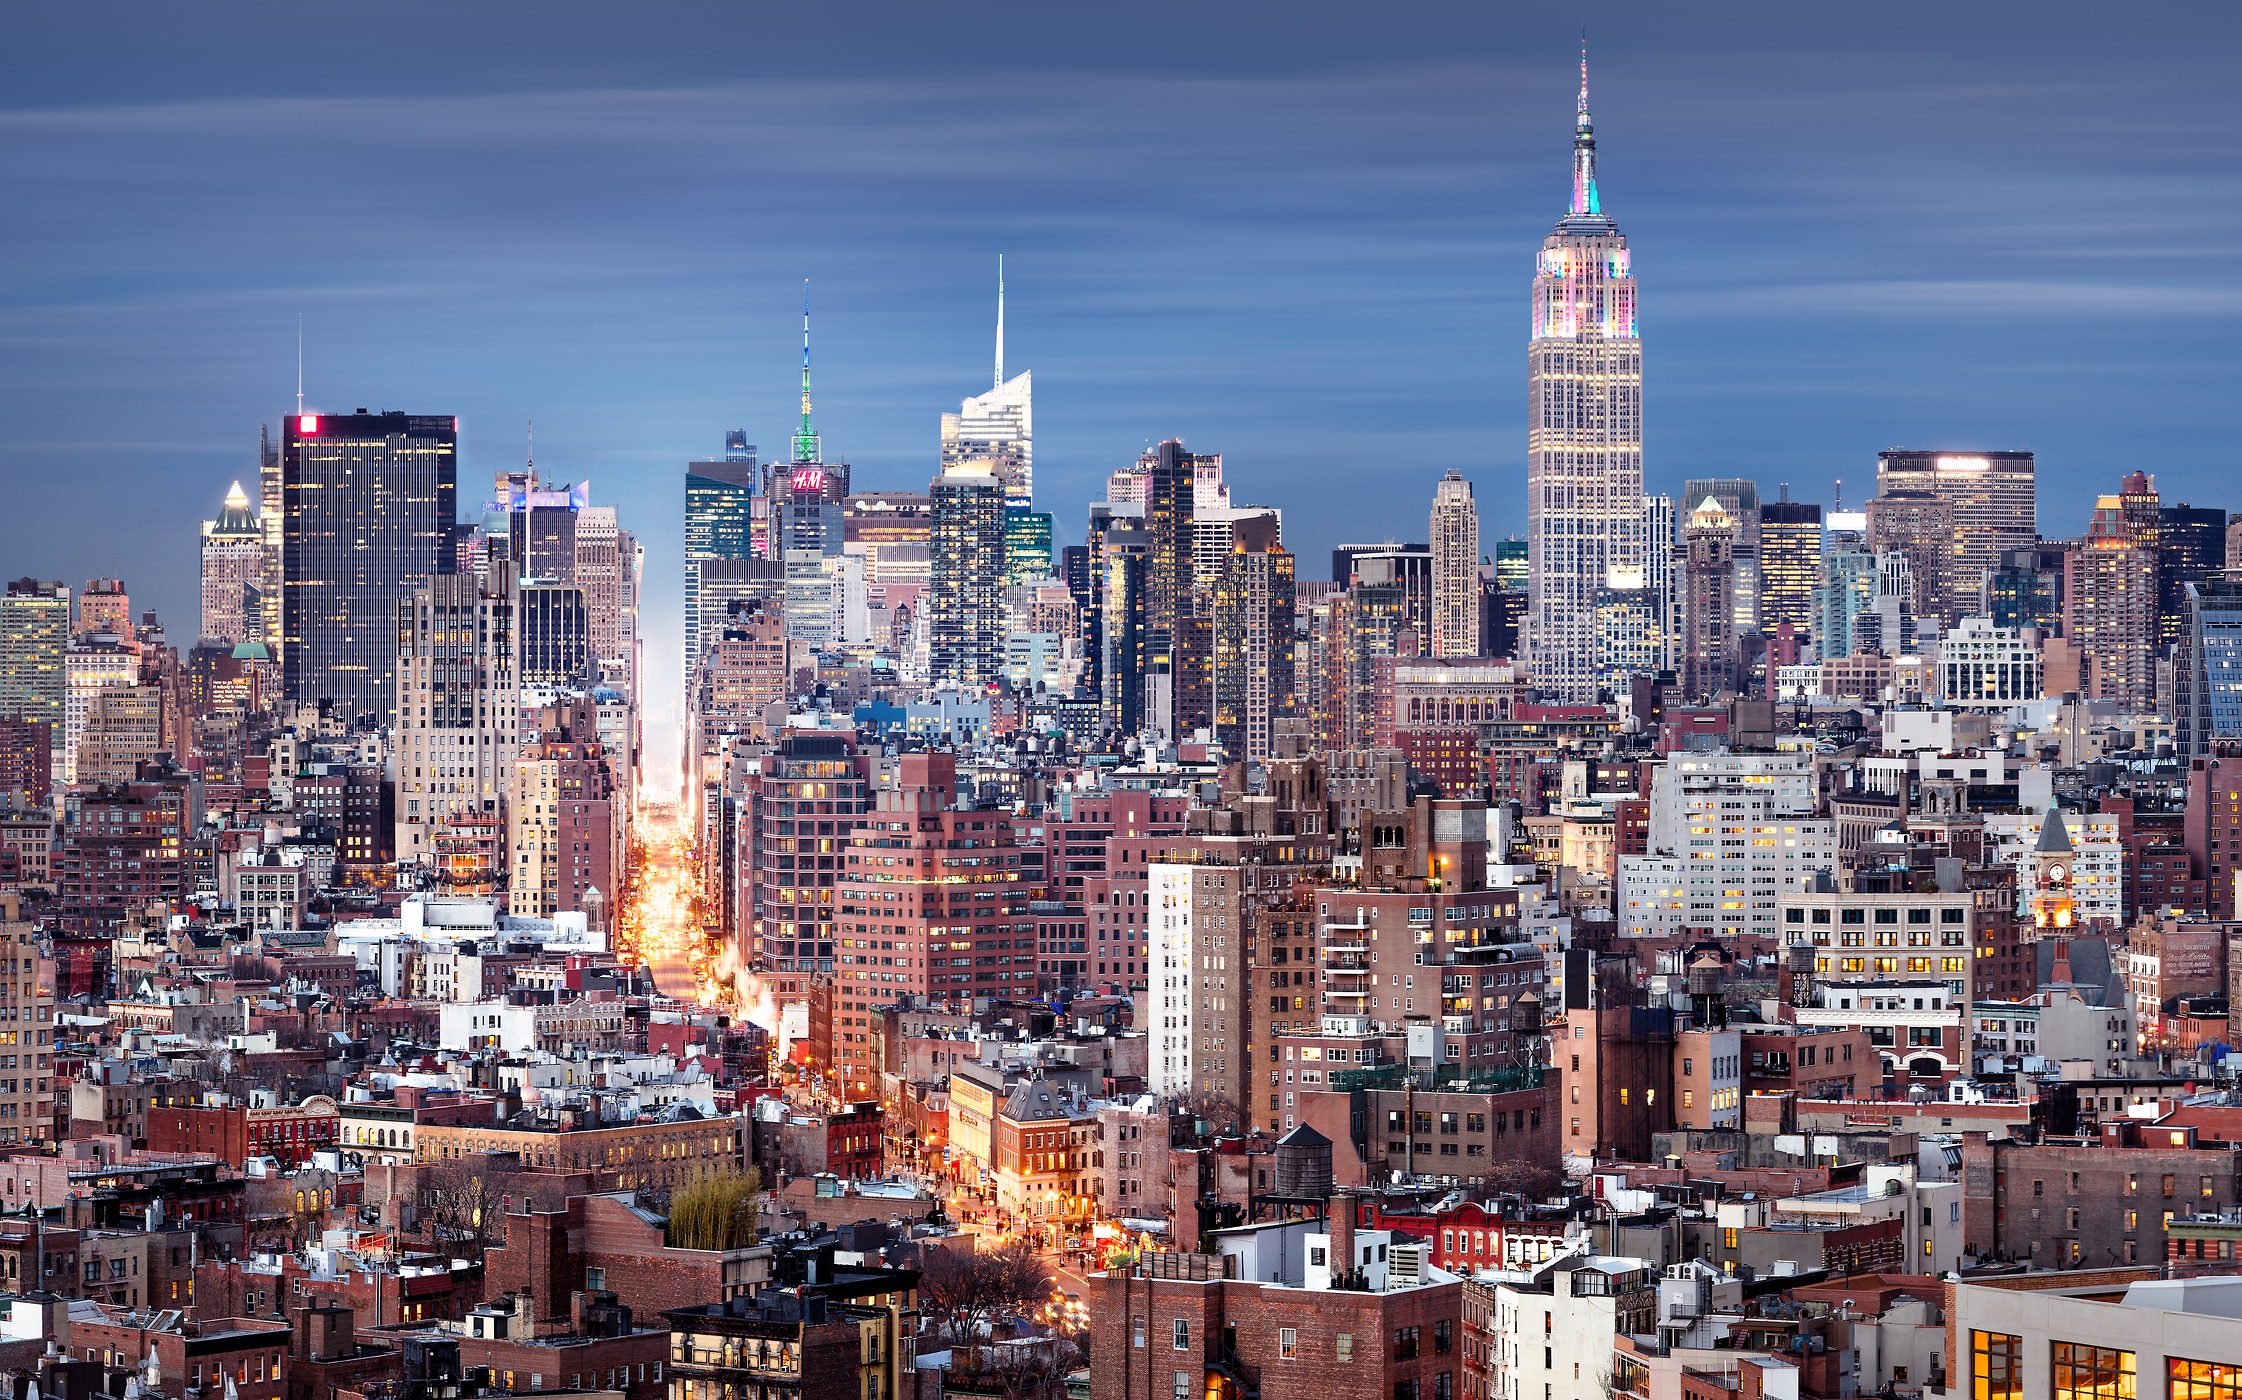 185 megapixels! A very high resolution, large-format VAST photo print of the Manhattan, New York City skyline at dusk; cityscape photo created by Dan Piech.